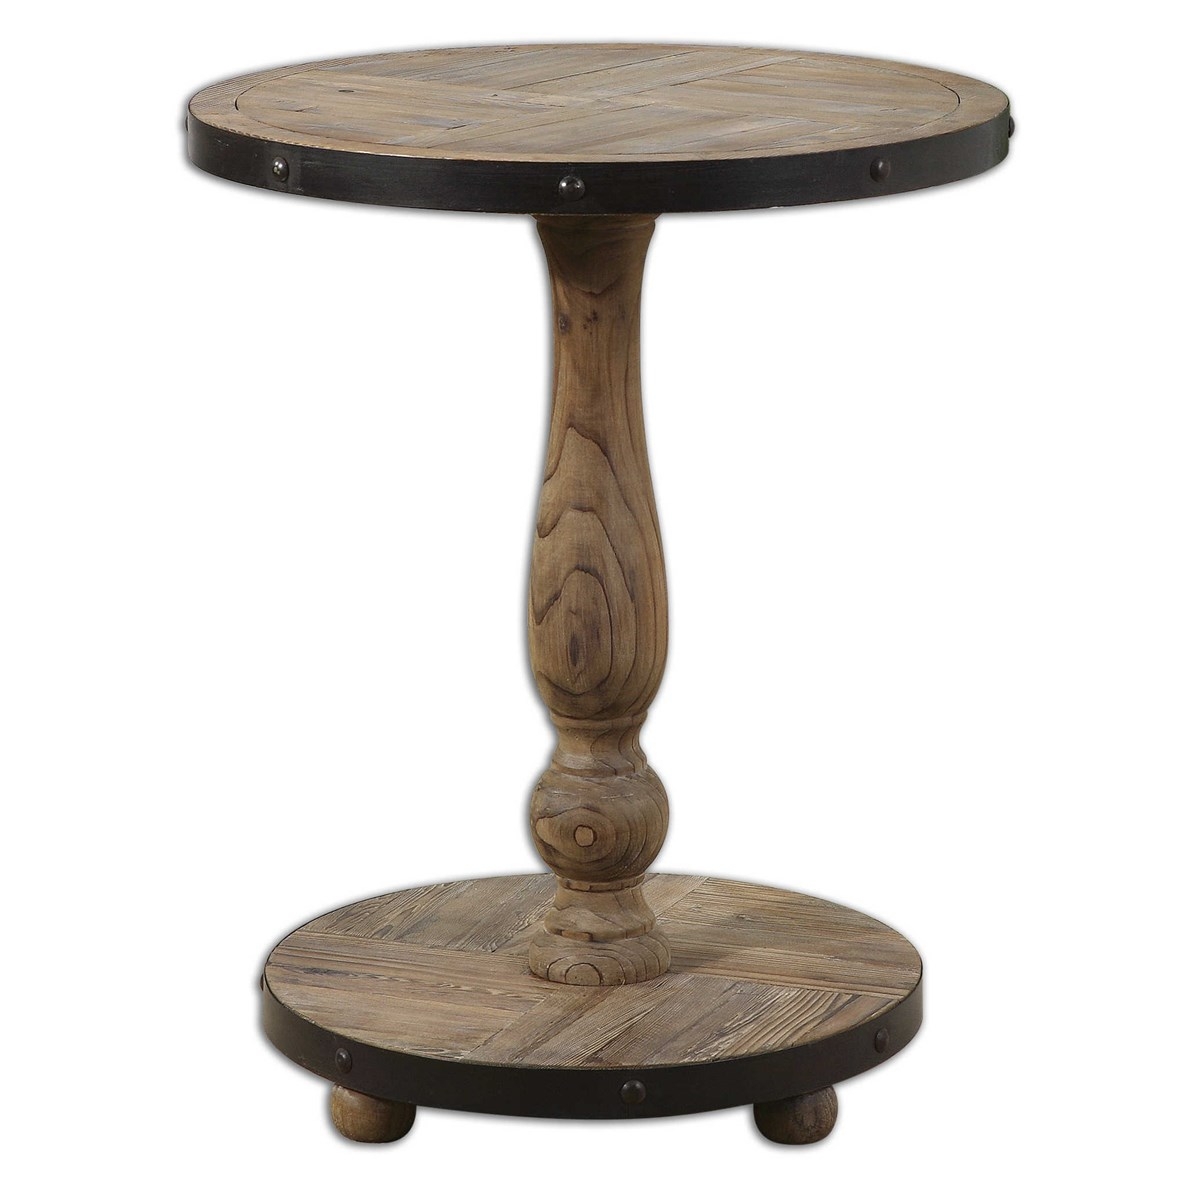 Kumberlin Wooden Round Table - Image 0